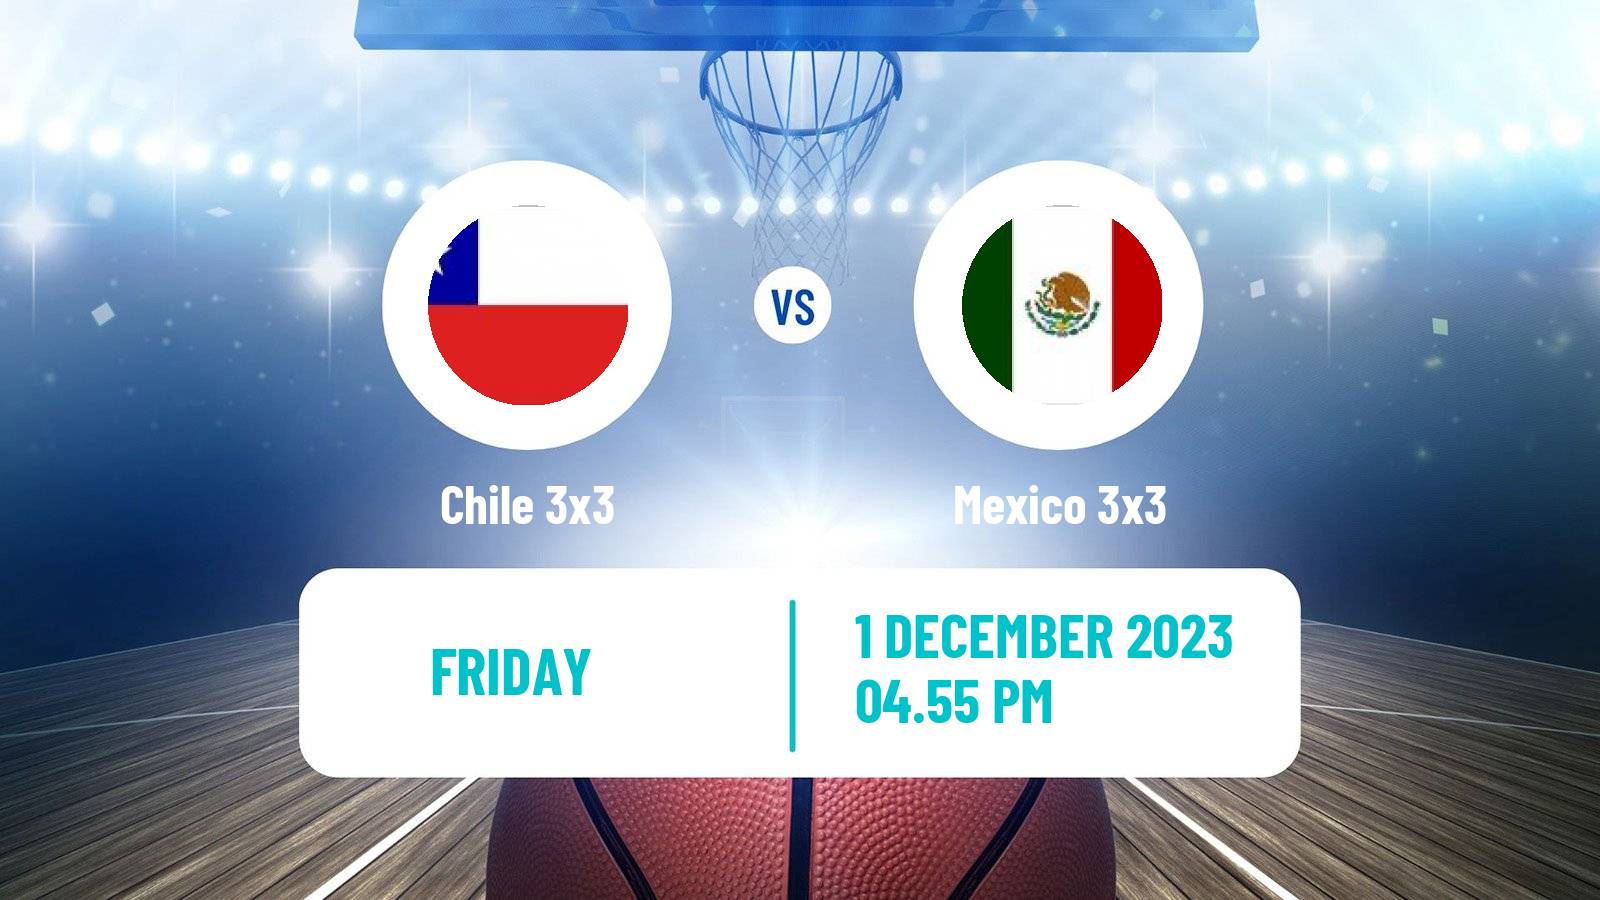 Basketball Americup 3x3 Chile 3x3 - Mexico 3x3